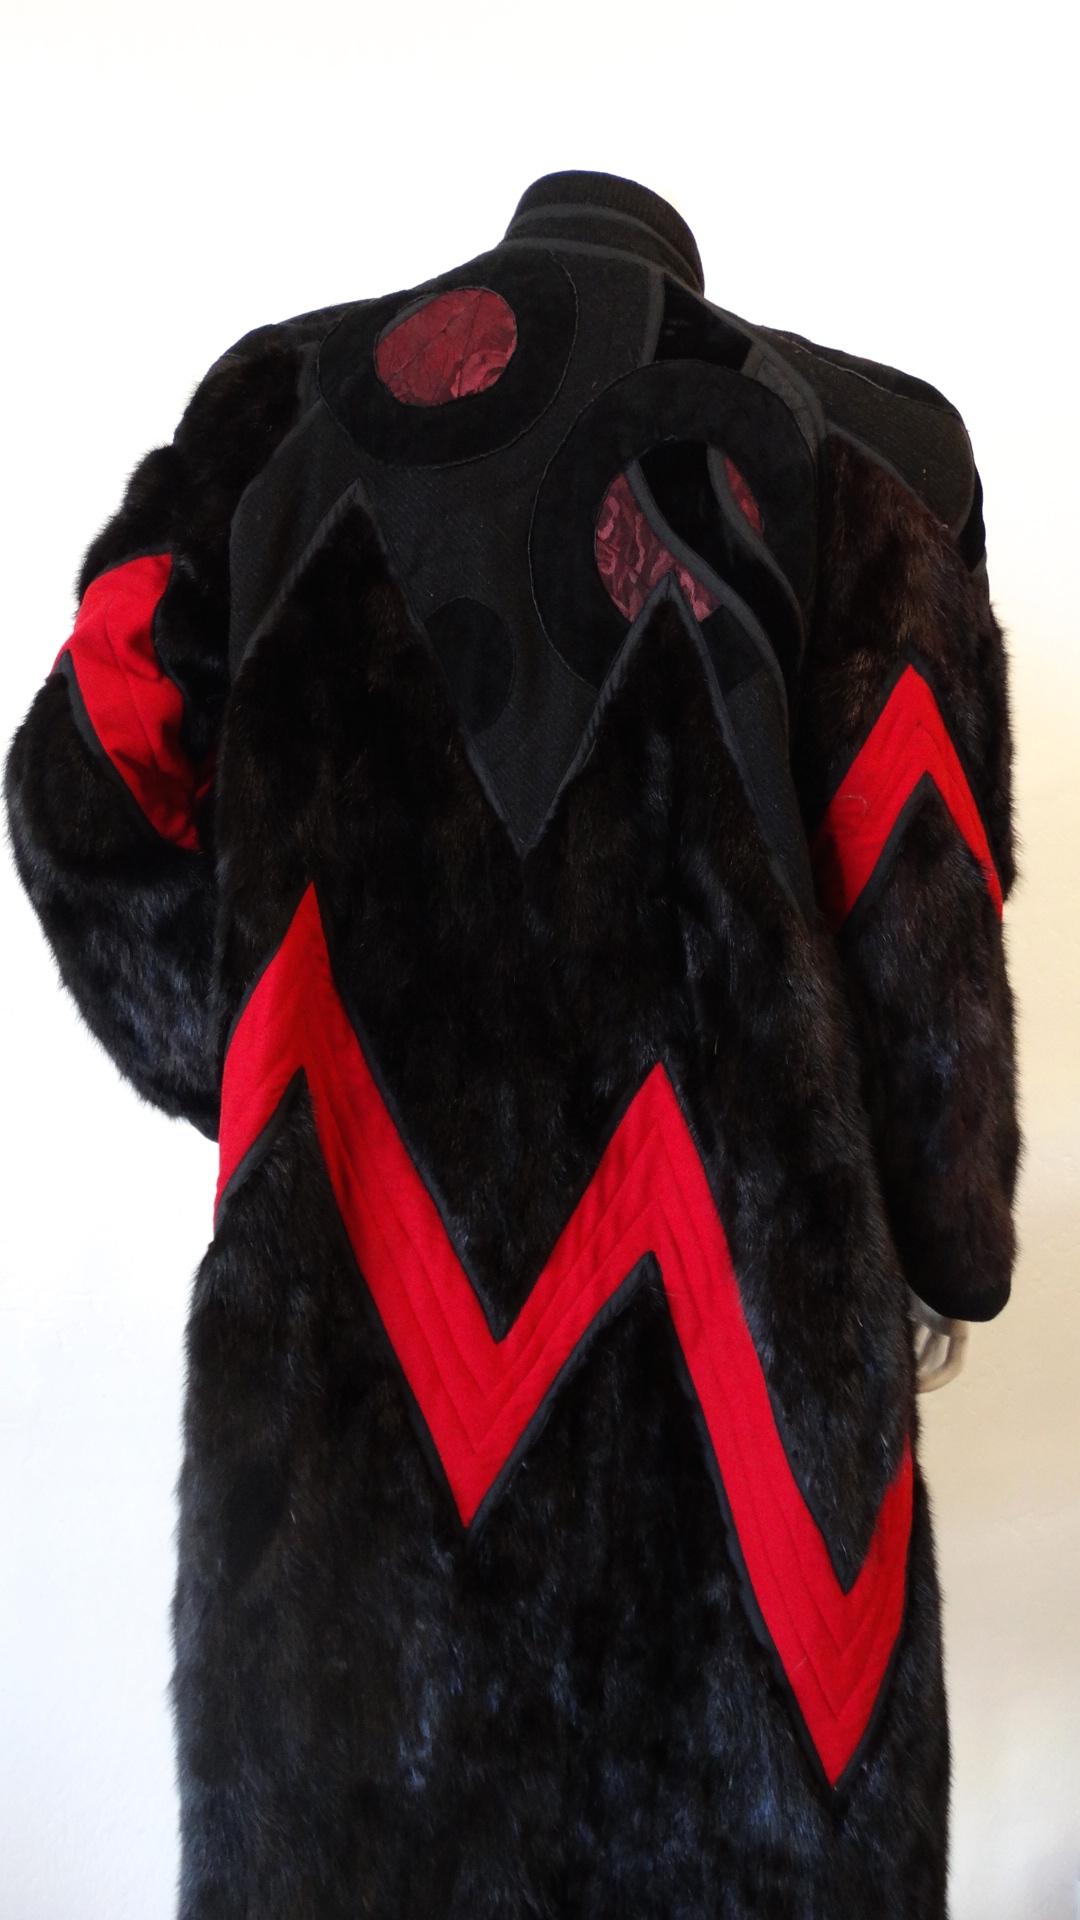 Get Ready For Winter With This Koos Van Den Akker Mink Patchwork Coat Circa 1980s! This single breasted coat features gorgeous mink fur, fire engine red zig zags and an abstract design on the front and back shoulders. A short standing collar is